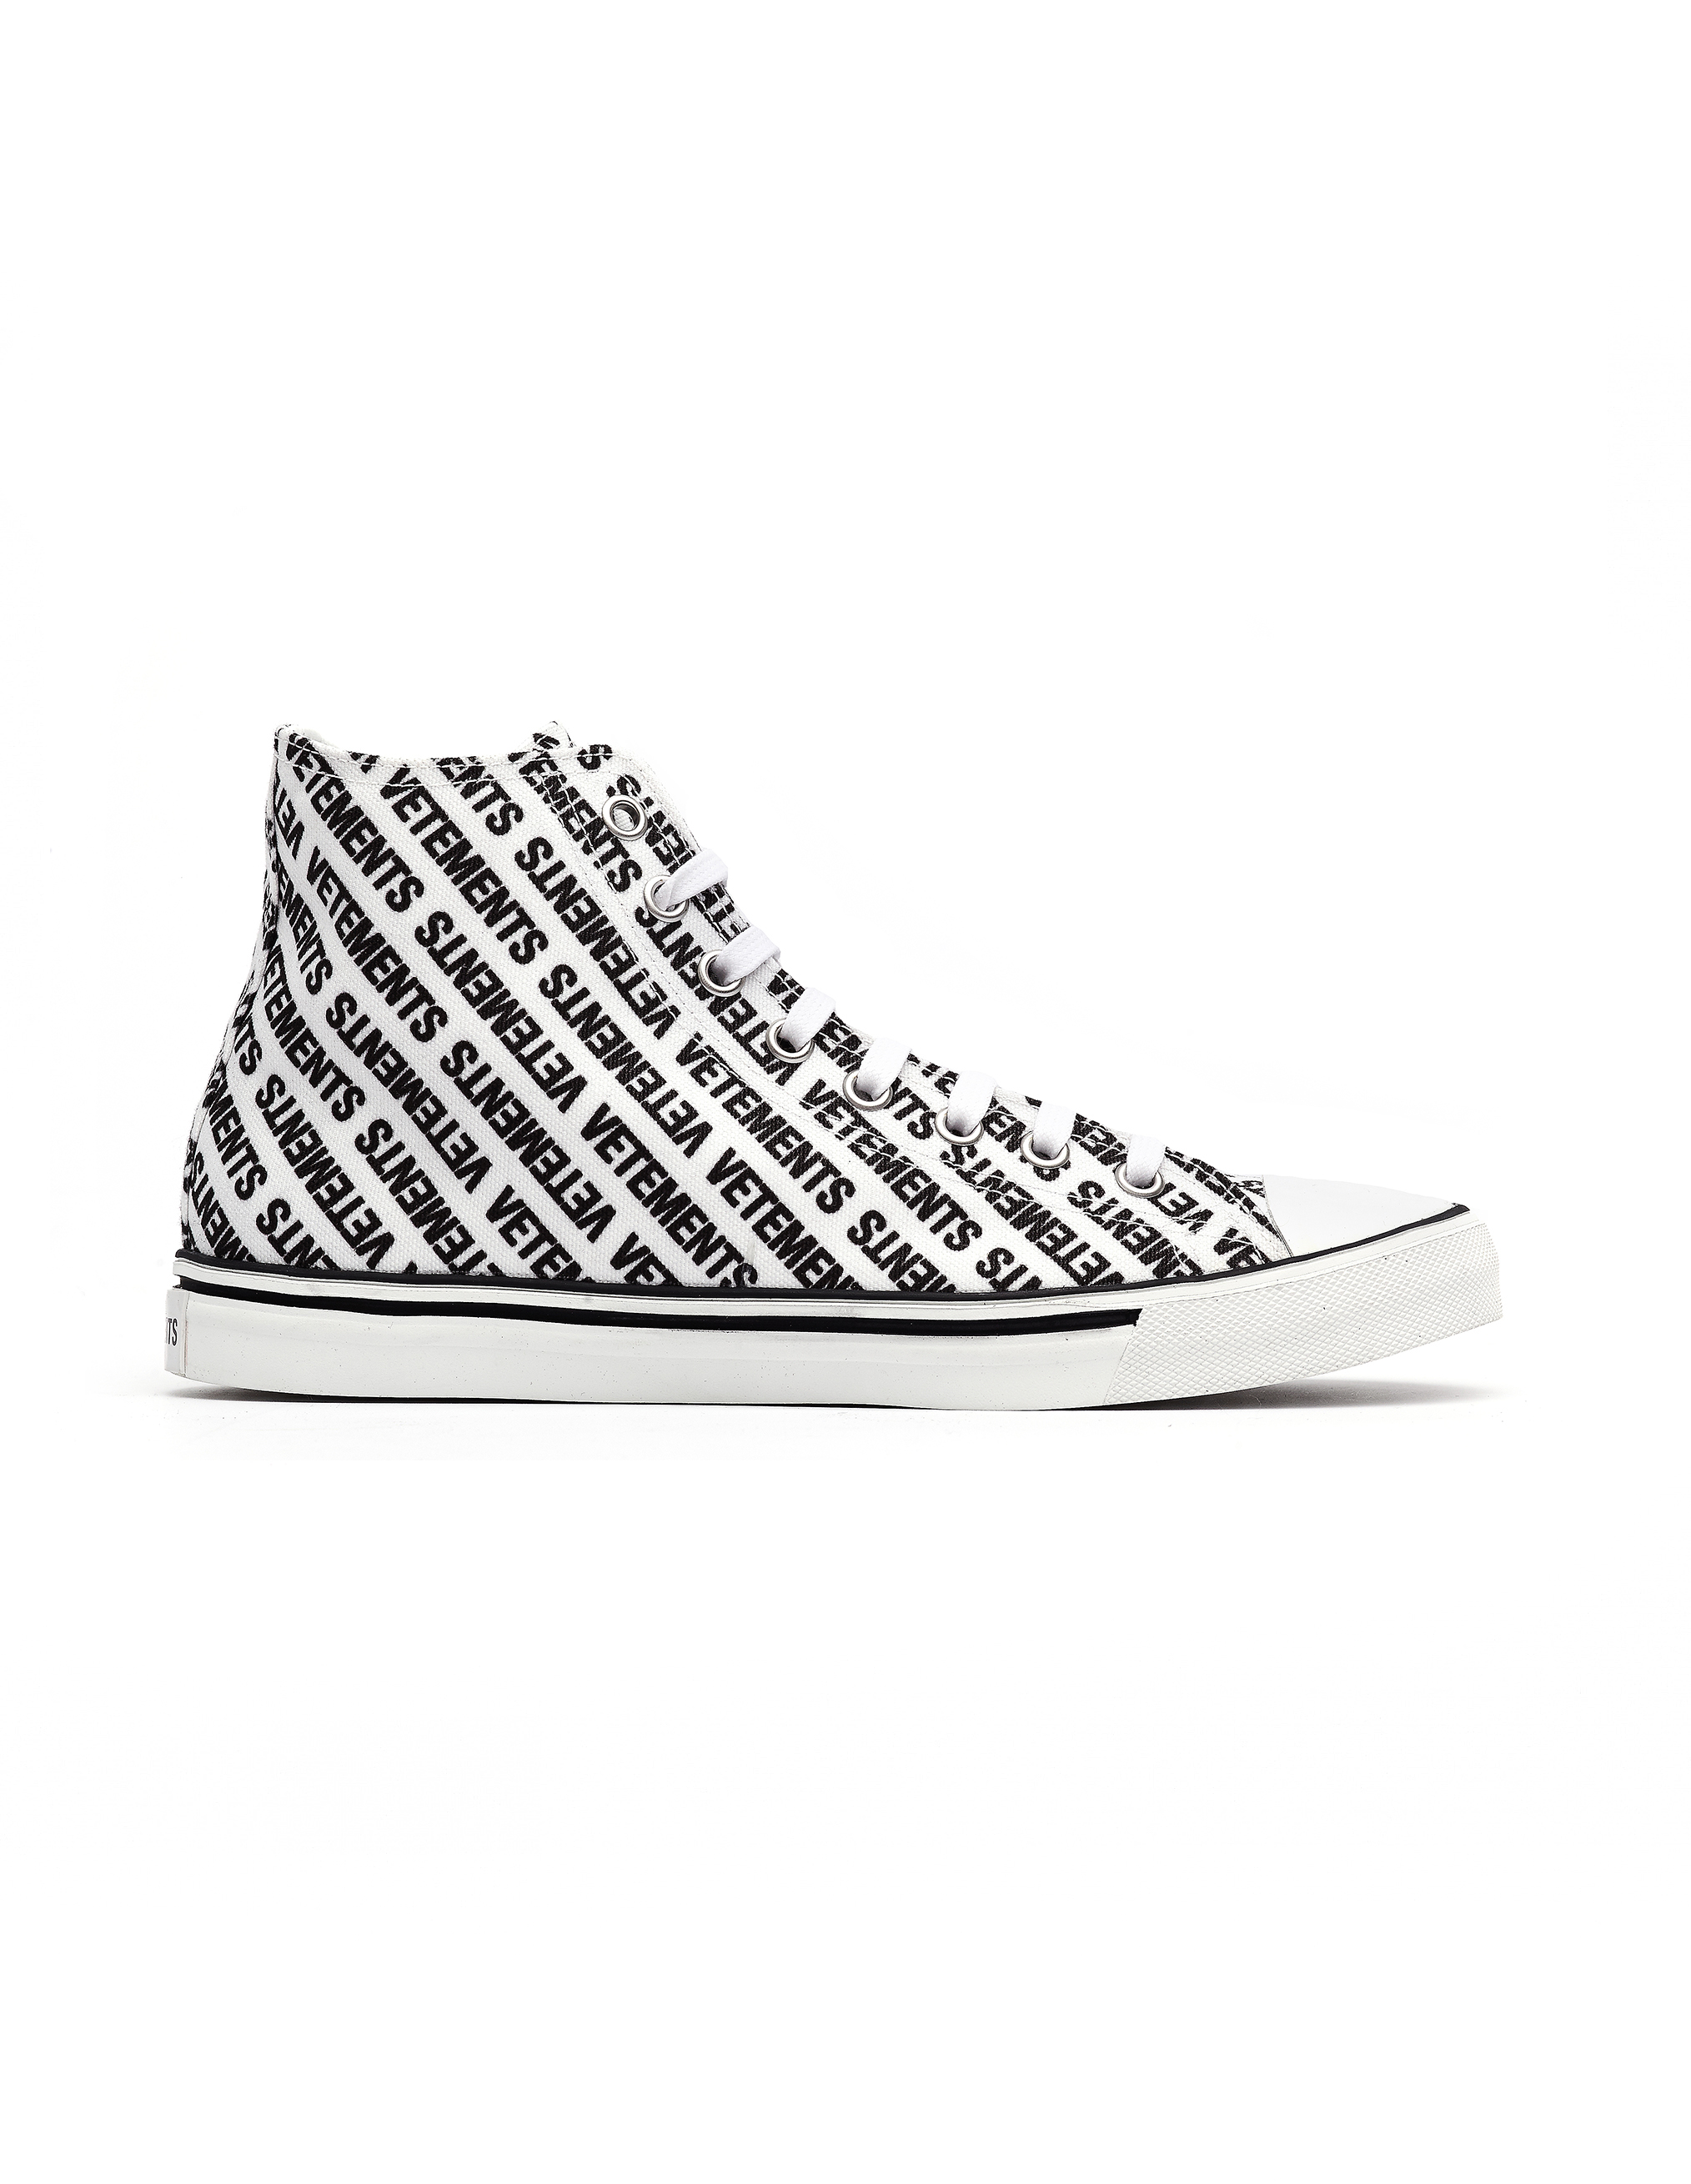 converse chuck taylor all star dainty shoes